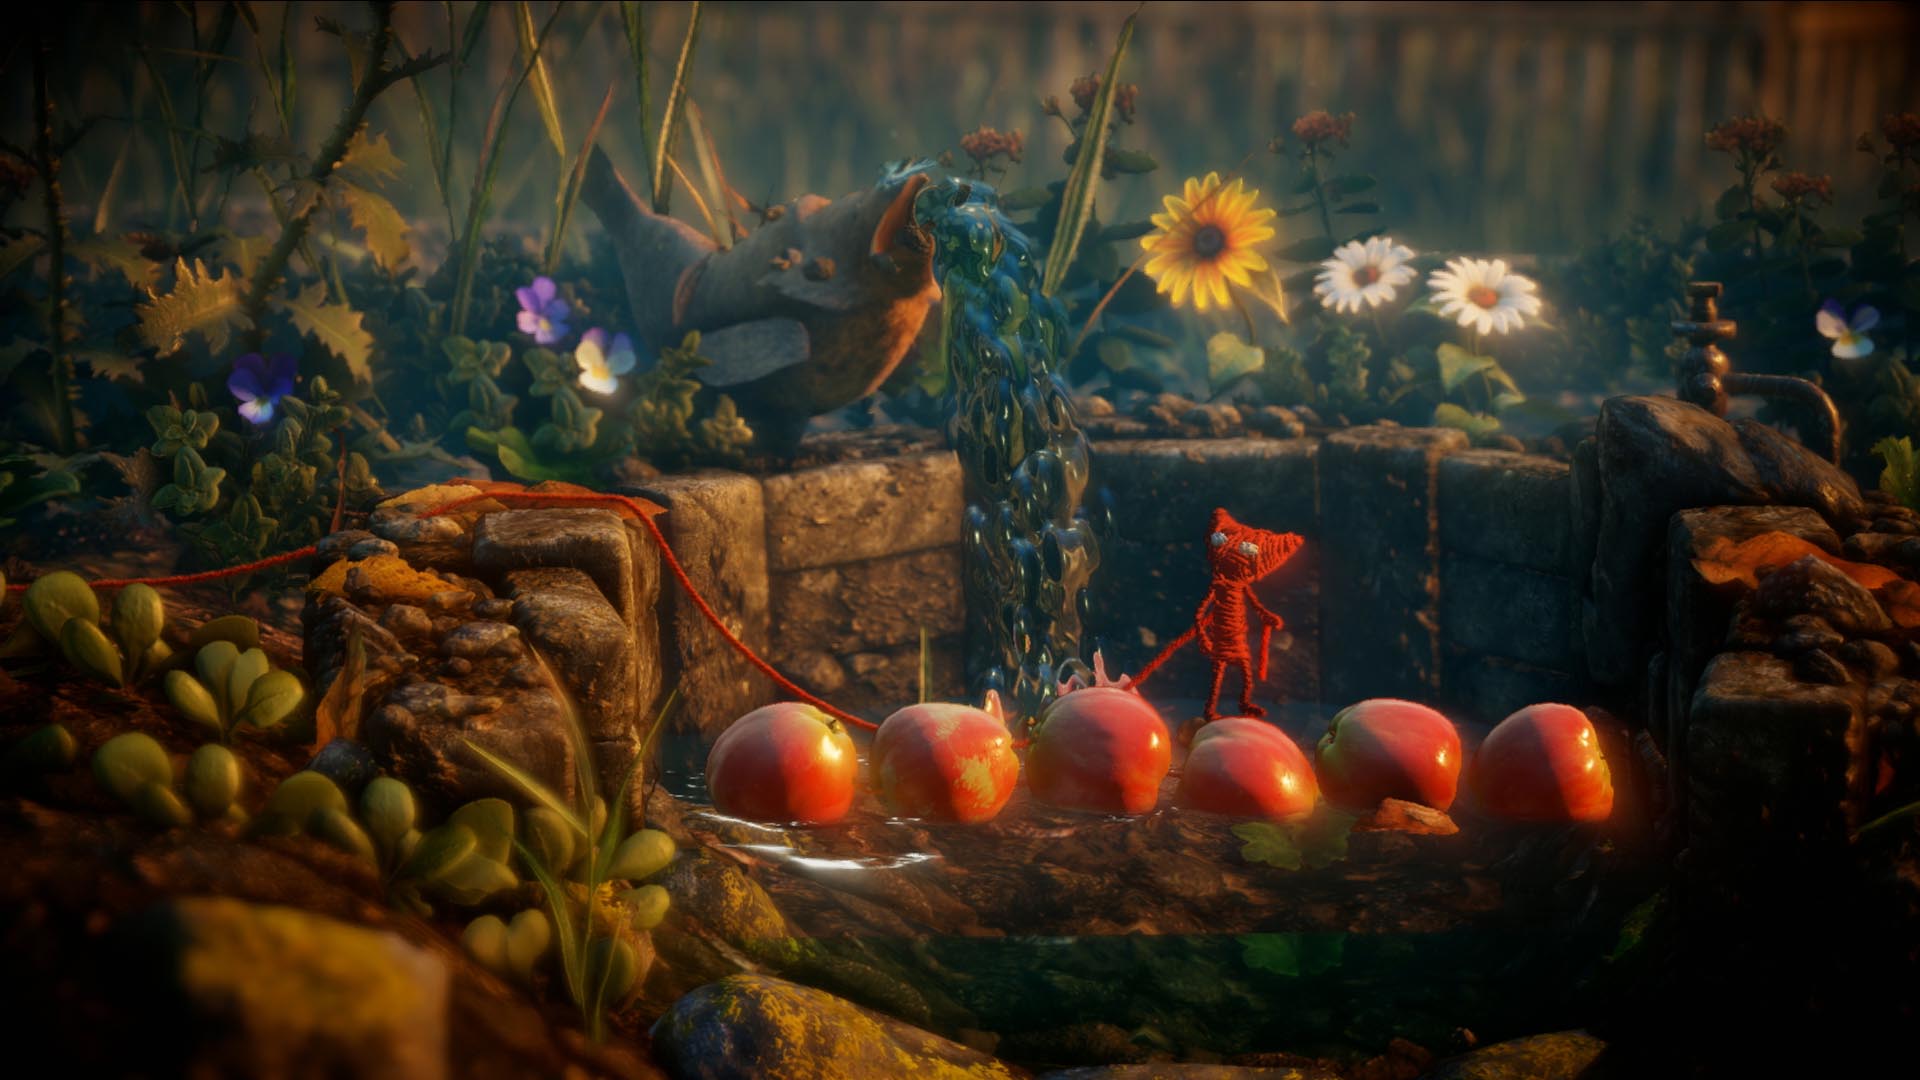 Unravel Two - PS4 & PS5